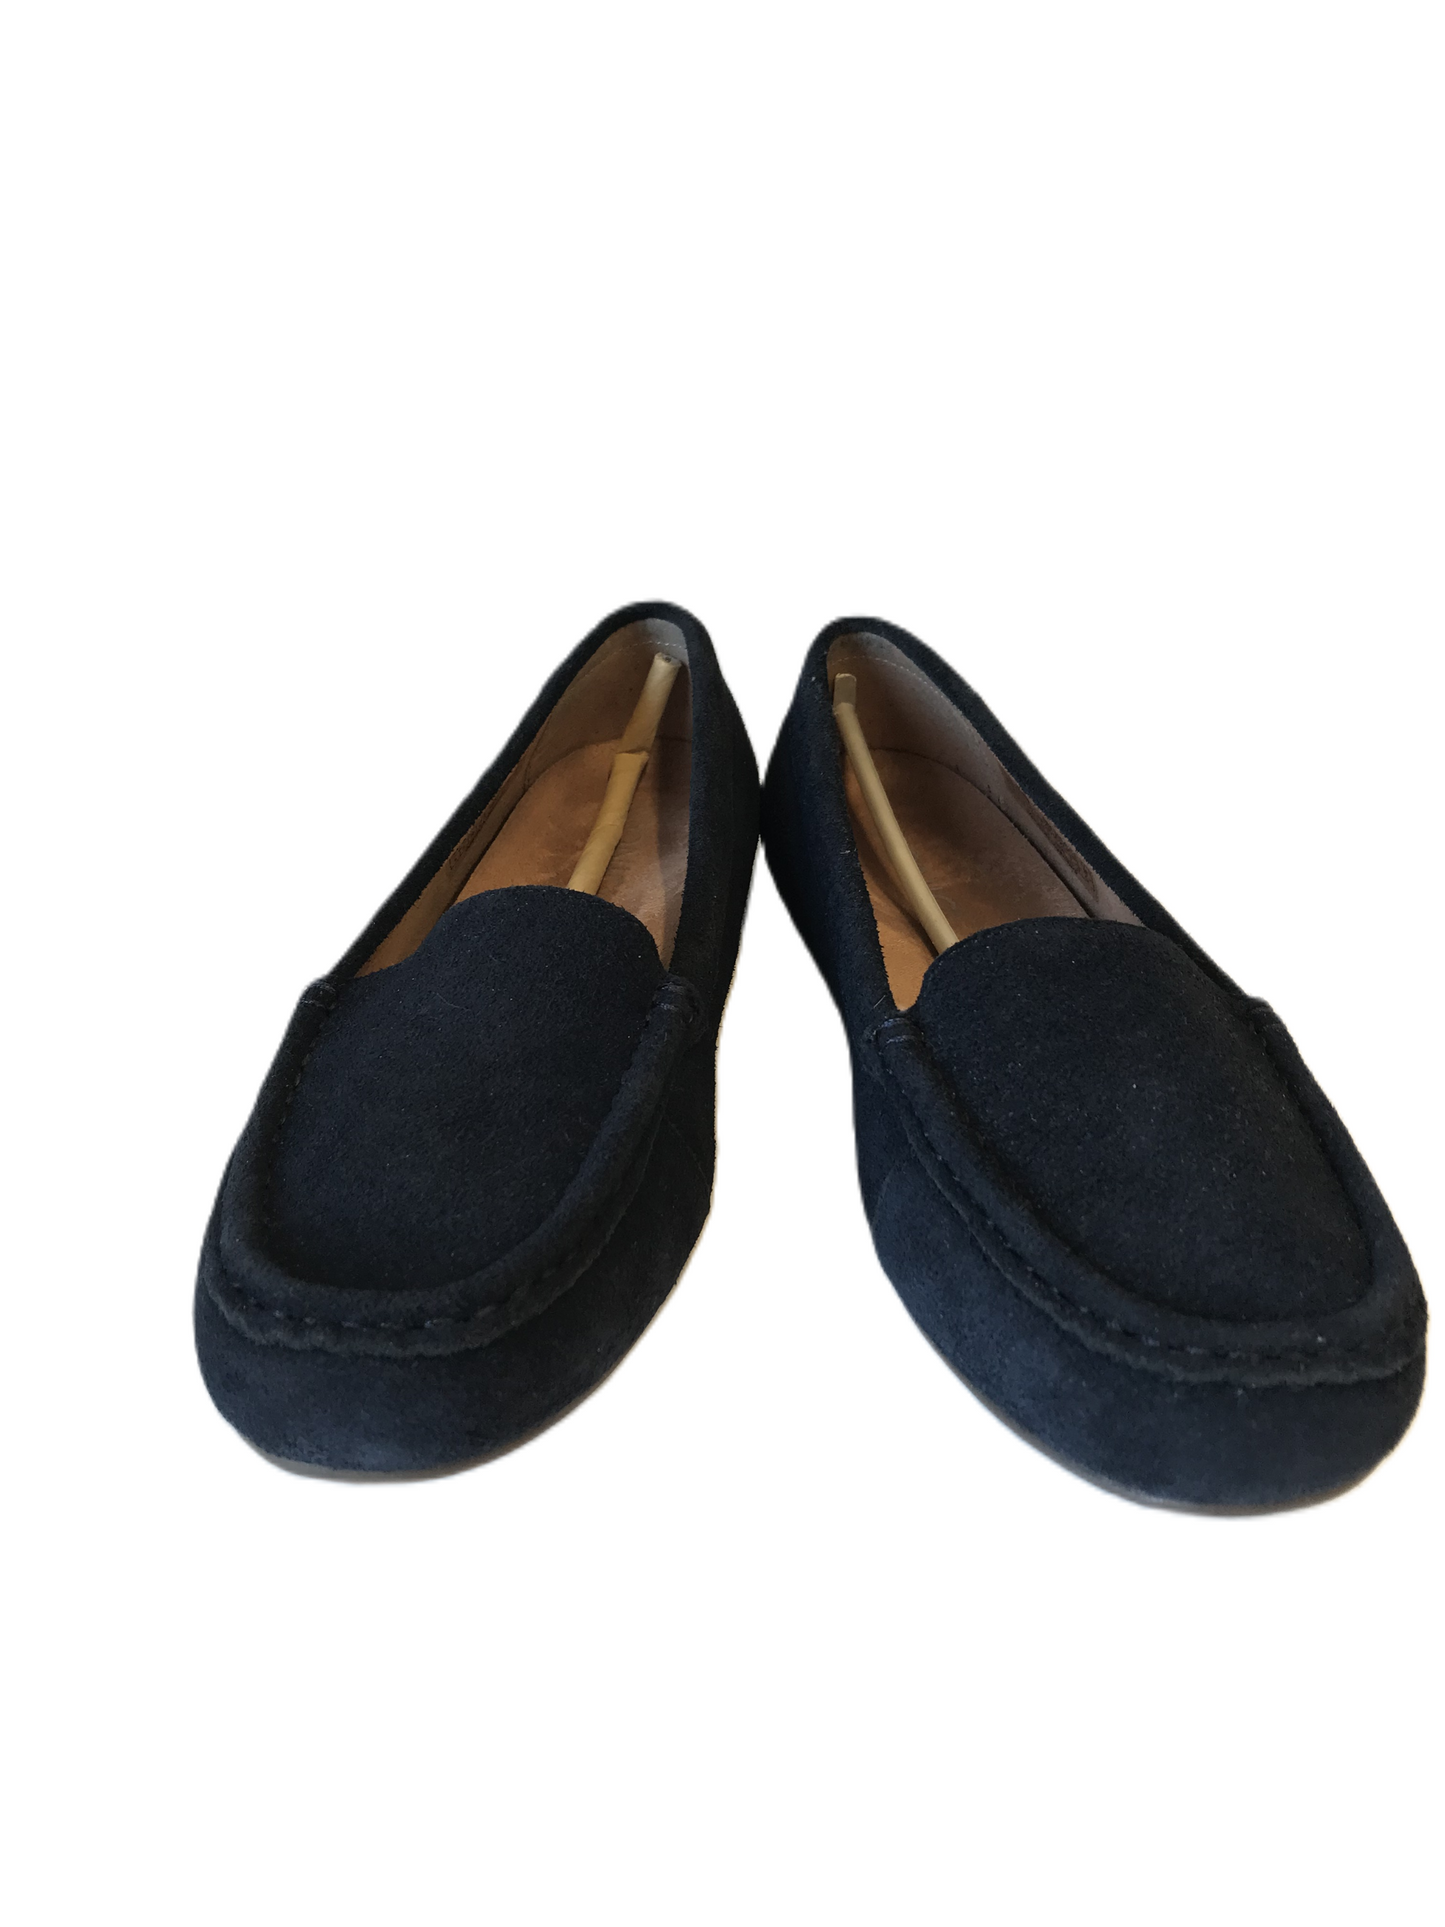 Navy Shoes Flats By Vionic, Size: 8